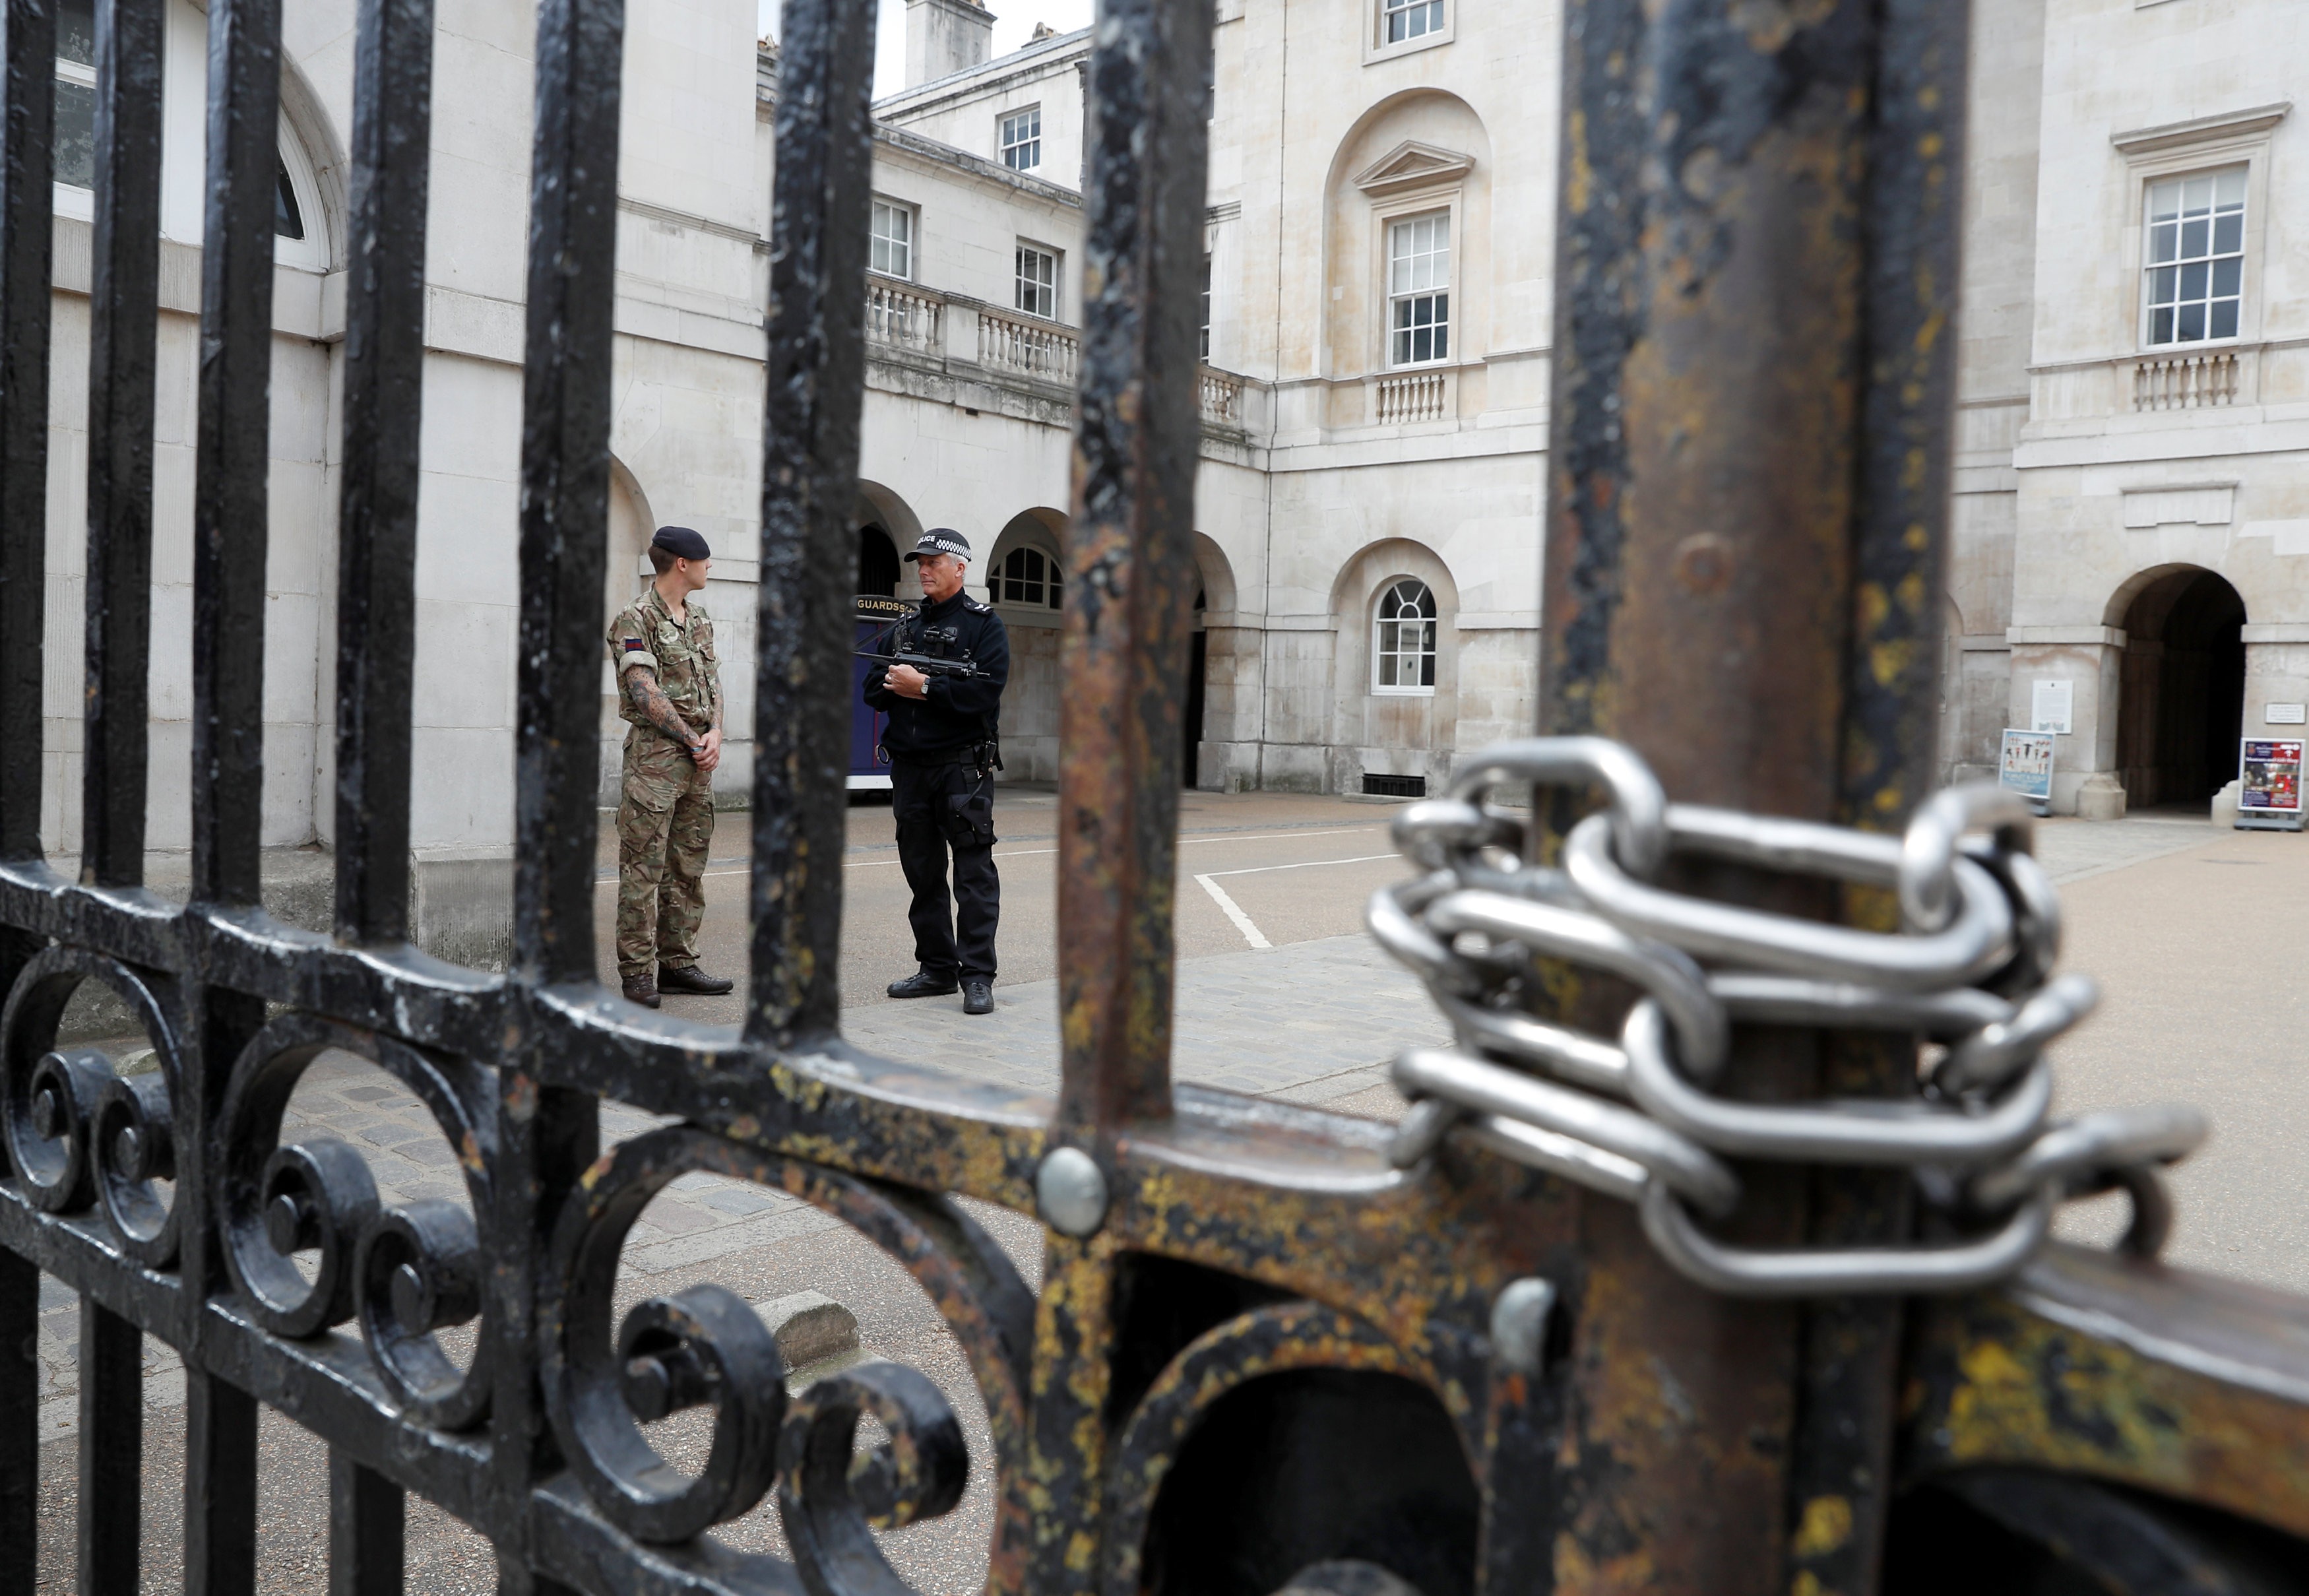 A police officer and a soldier stand at the entrance to Horse Guards Parade after it was closed because of the heightened security following an explosion on an underground train on Friday in London. Photo: Reuters